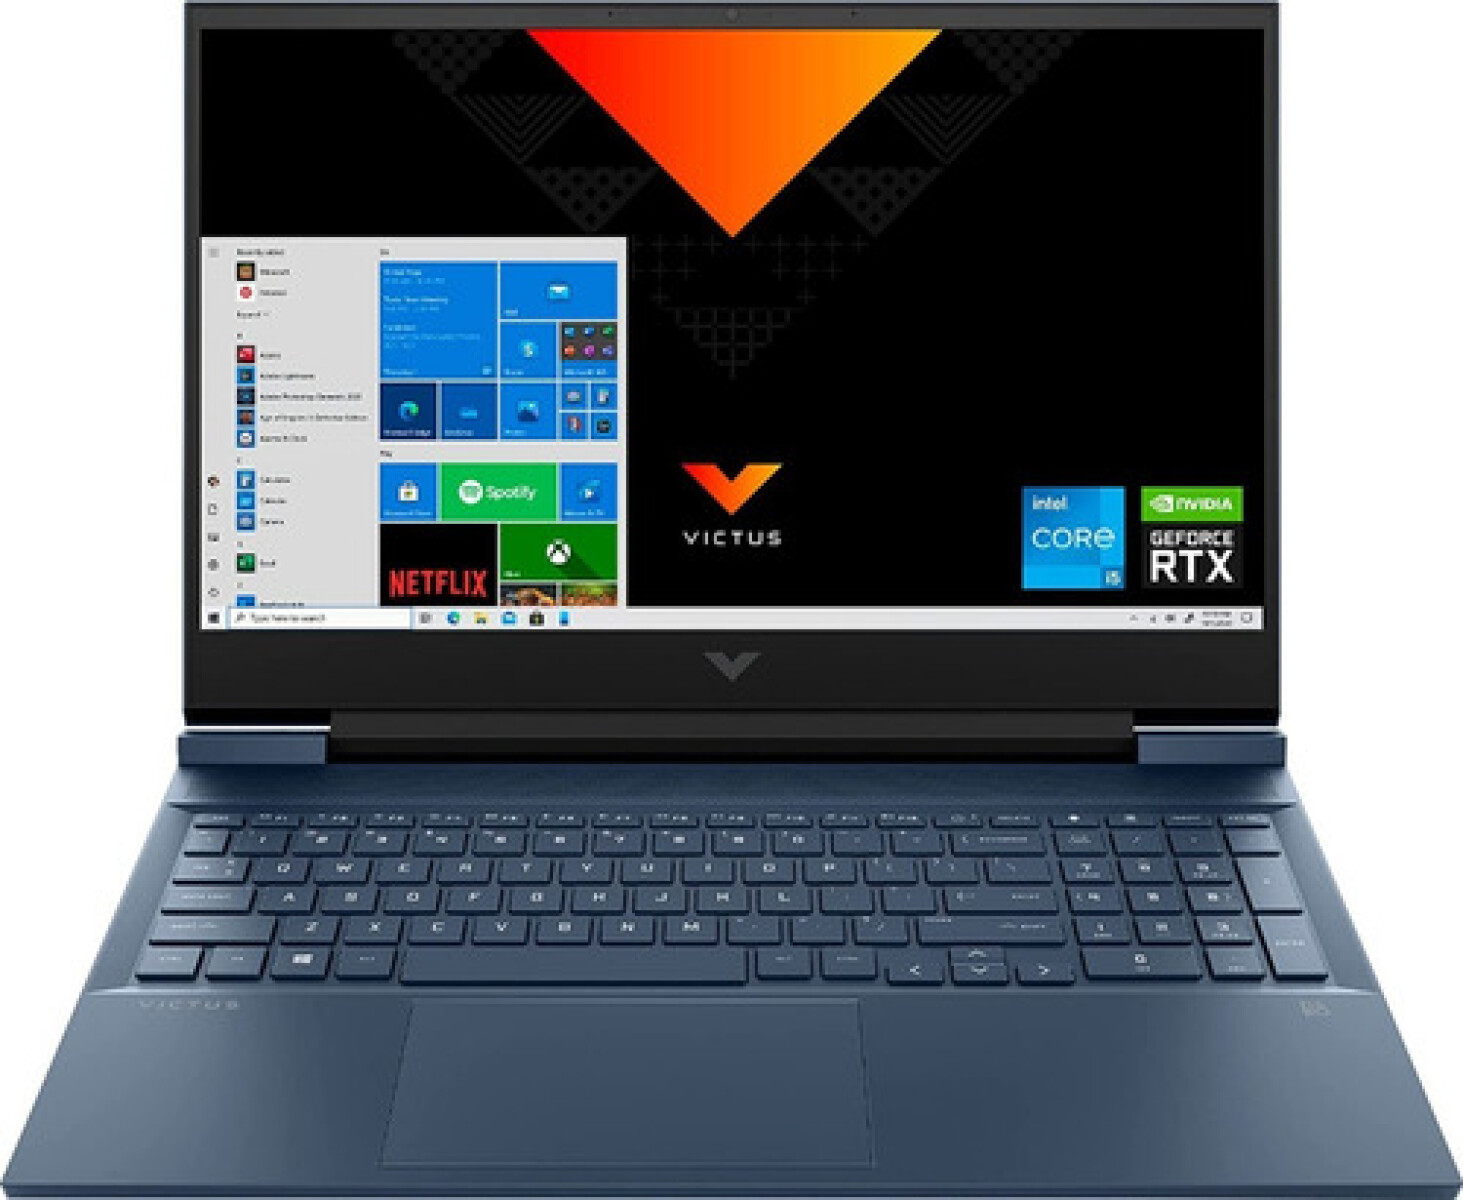 Notebook Hp Victus 16-d0023dx I5 8 256ssd Rtx3050 